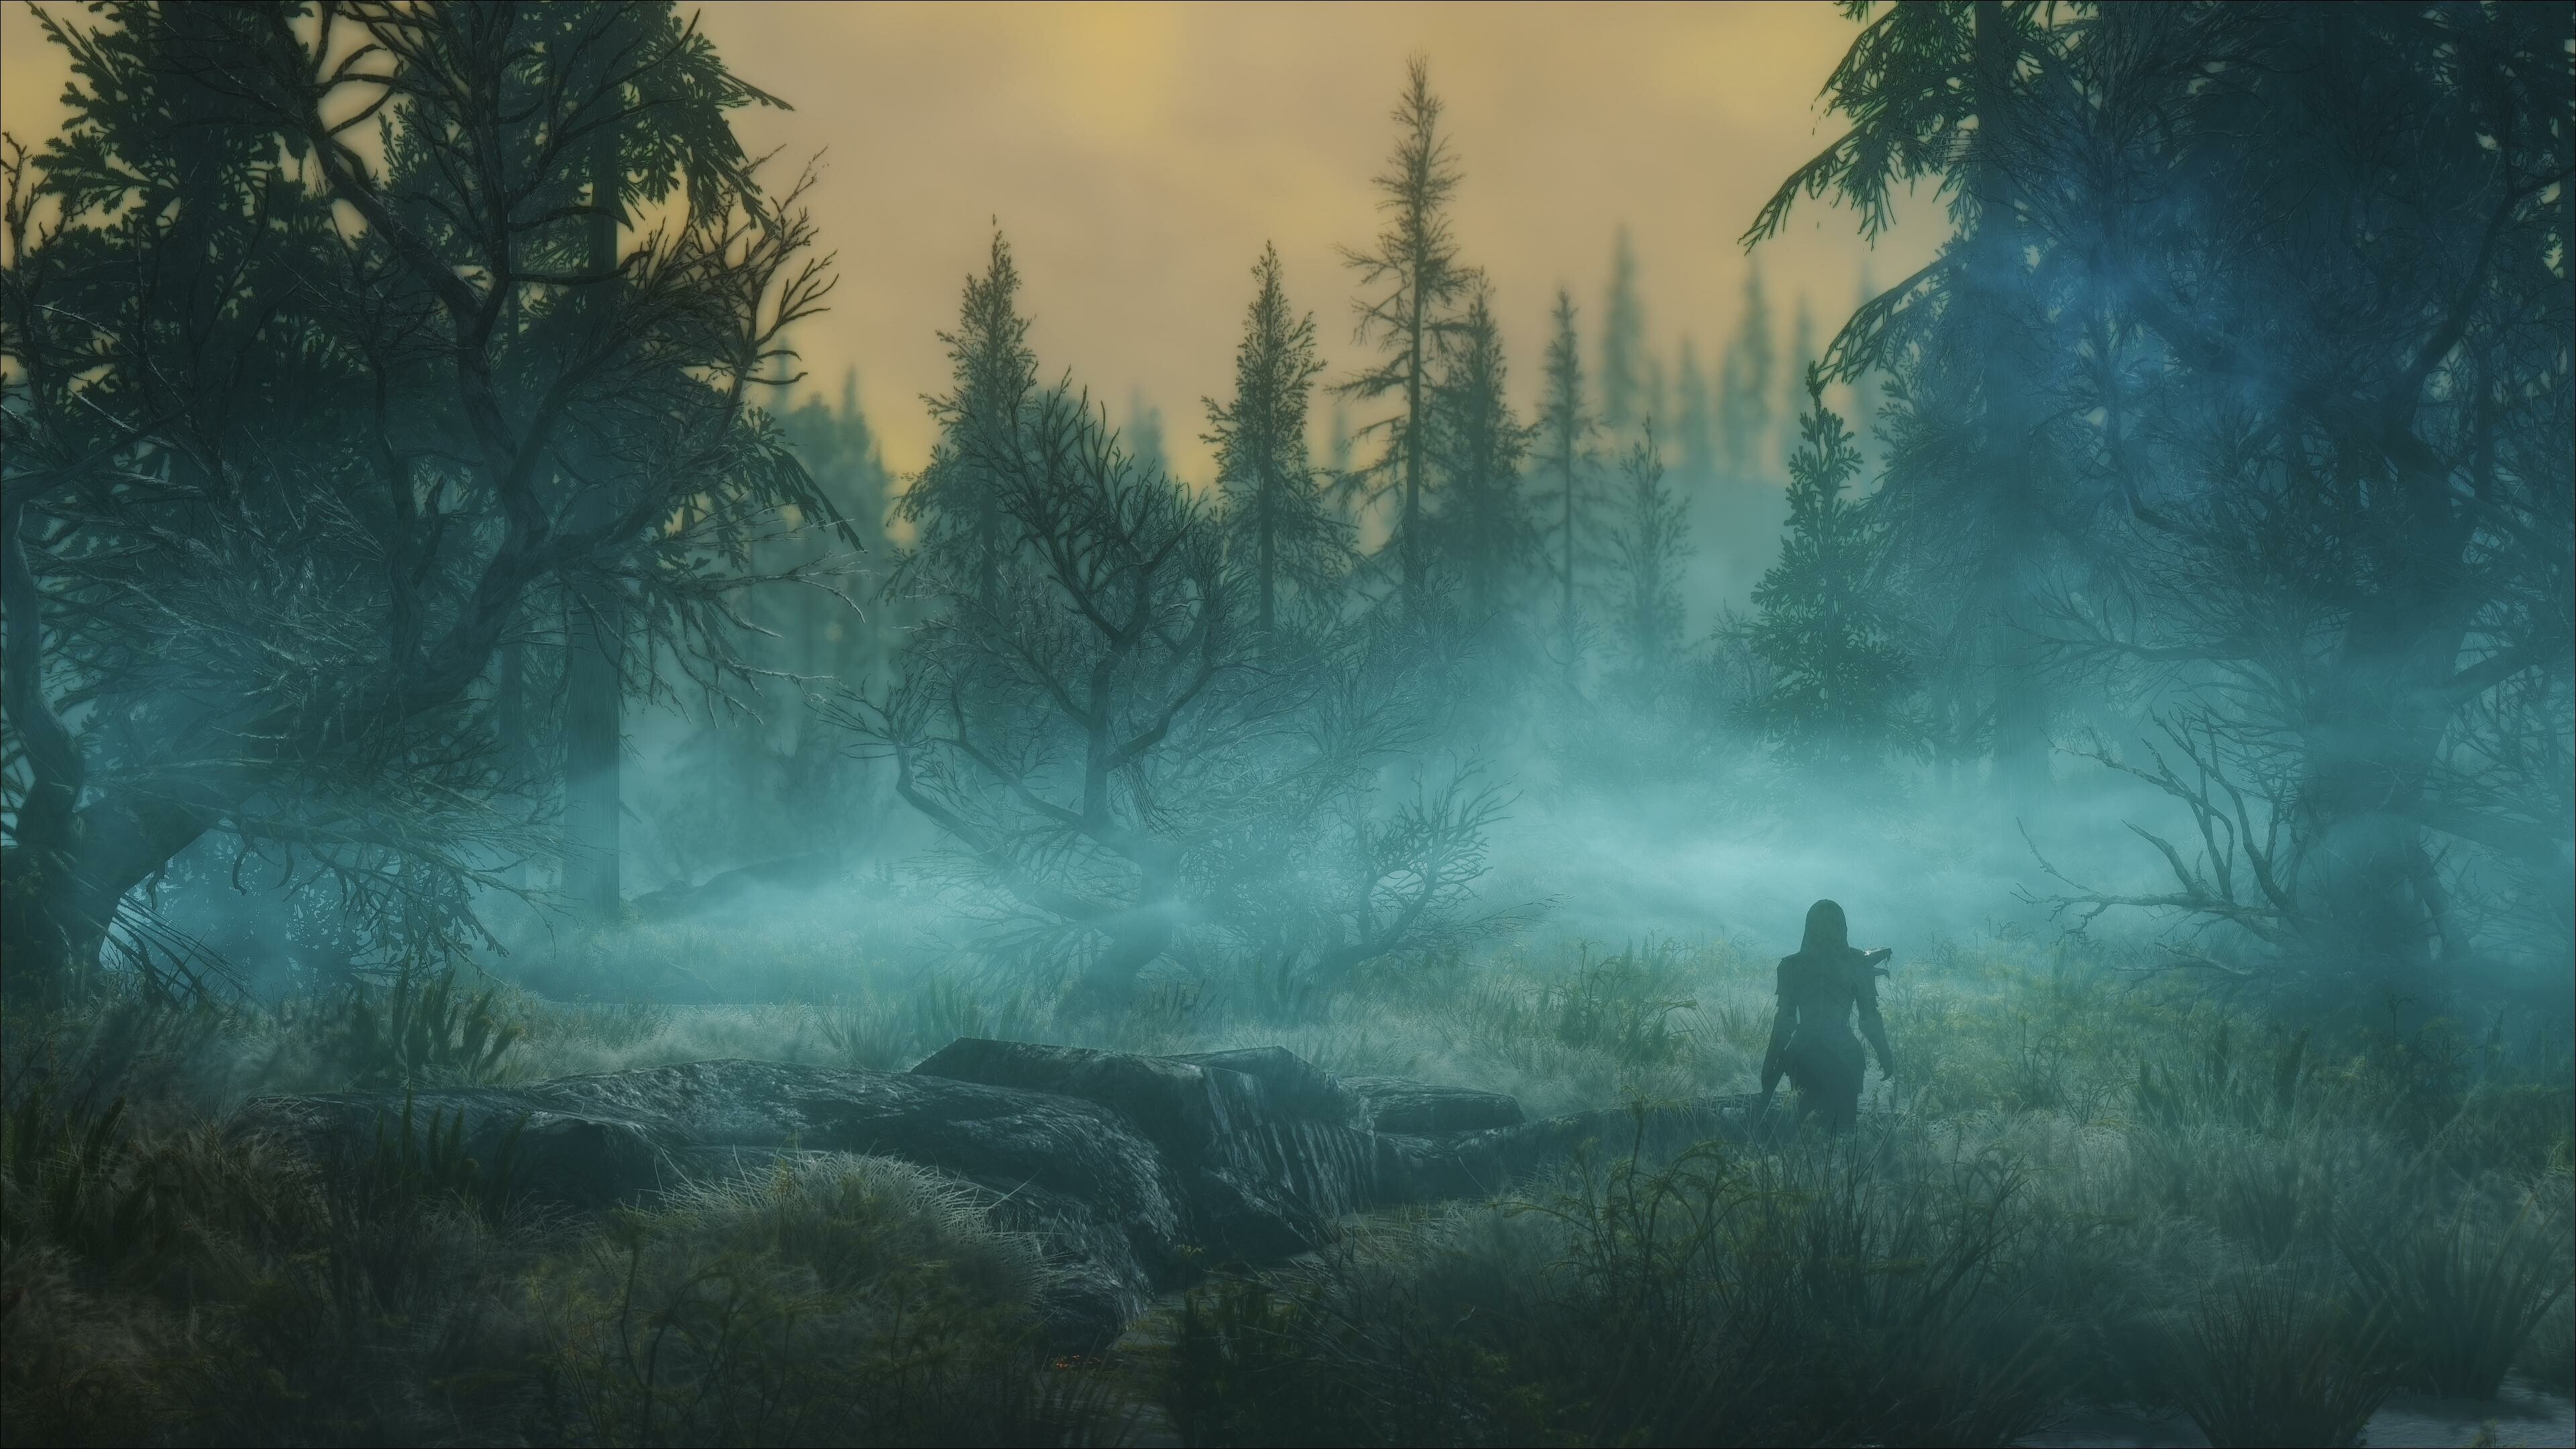 Skyrim: The Elder Scrolls V, An action role-playing video game developed by Bethesda Game Studios. 3840x2160 4K Background.